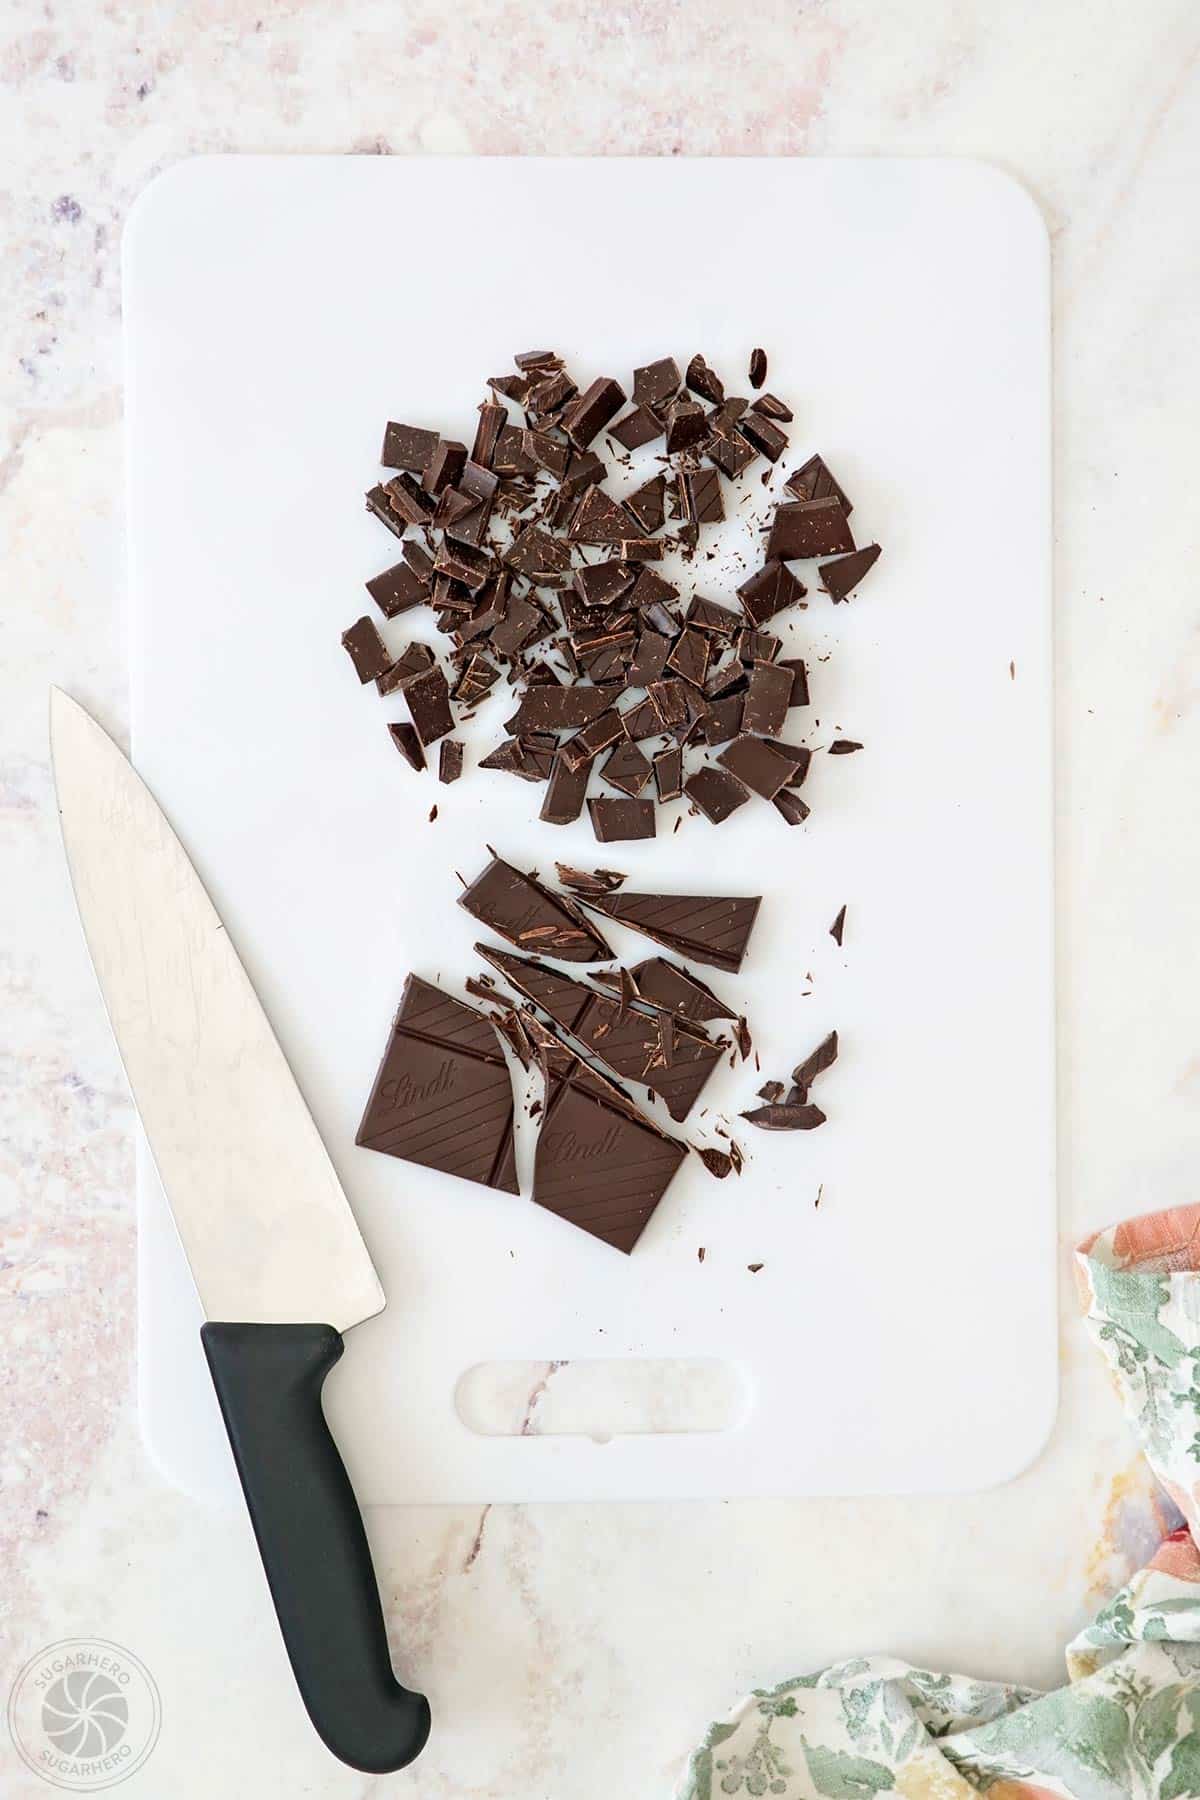 Chopped chocolate on a cutting board next to a knife.